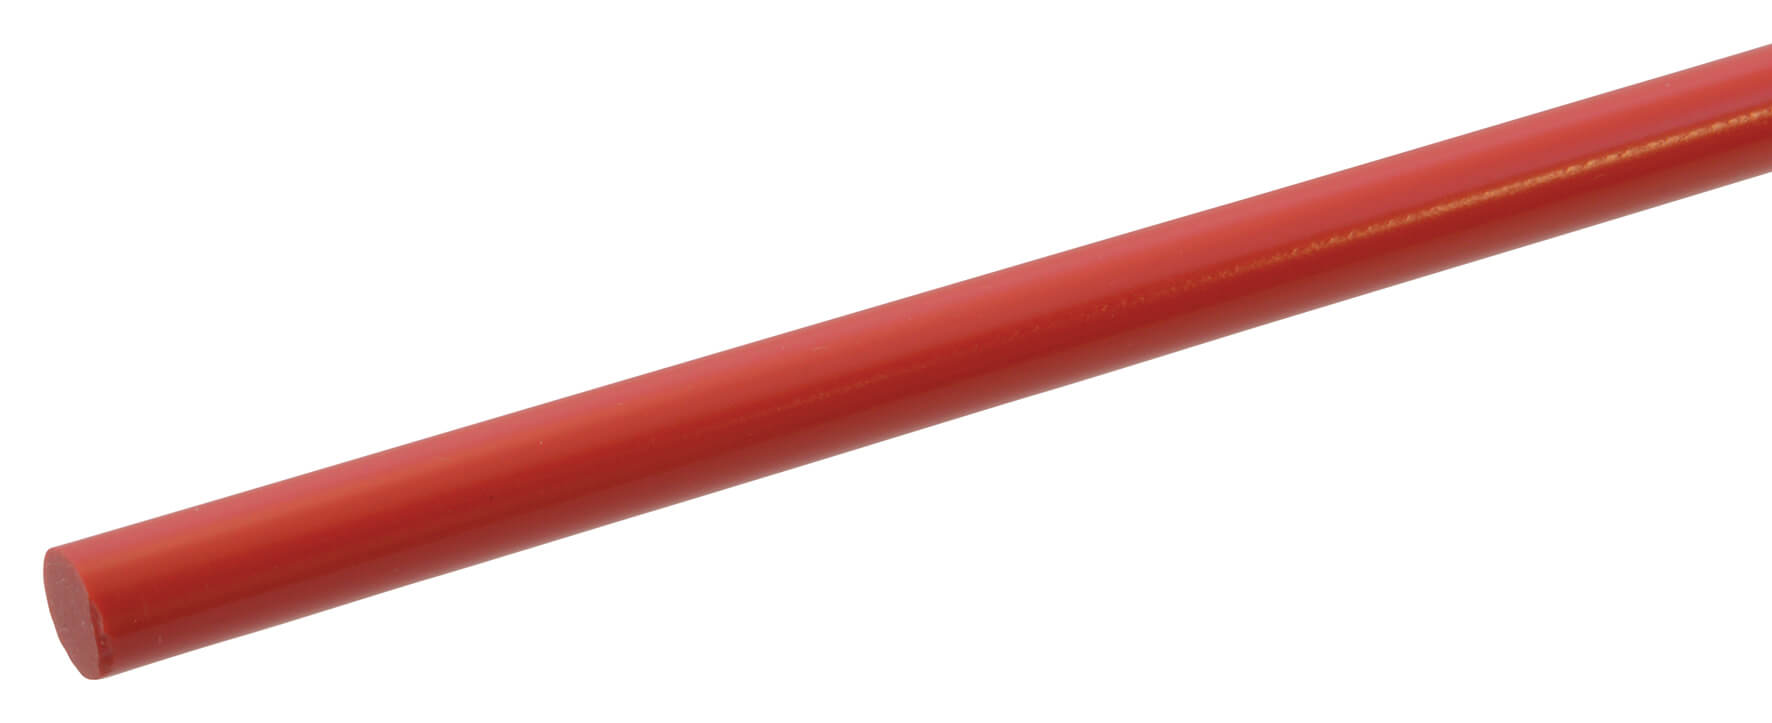 Acrylic Rod 6.4mm x 610mm - Solid Red